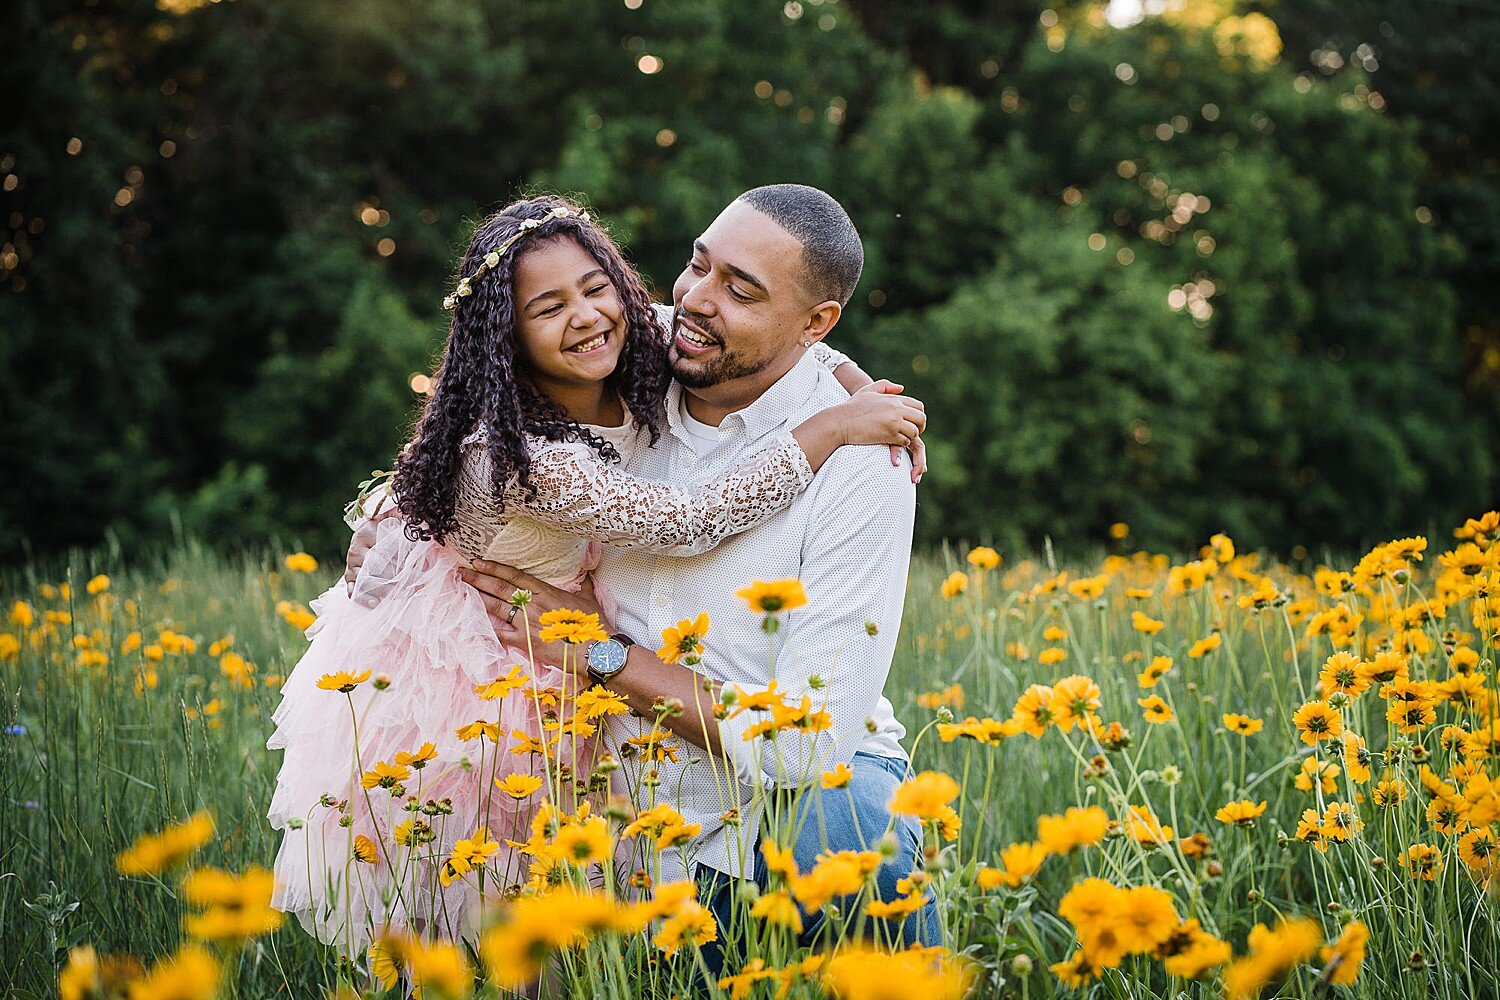  A father laughs with his daughter in a field of yellow wildflowers 